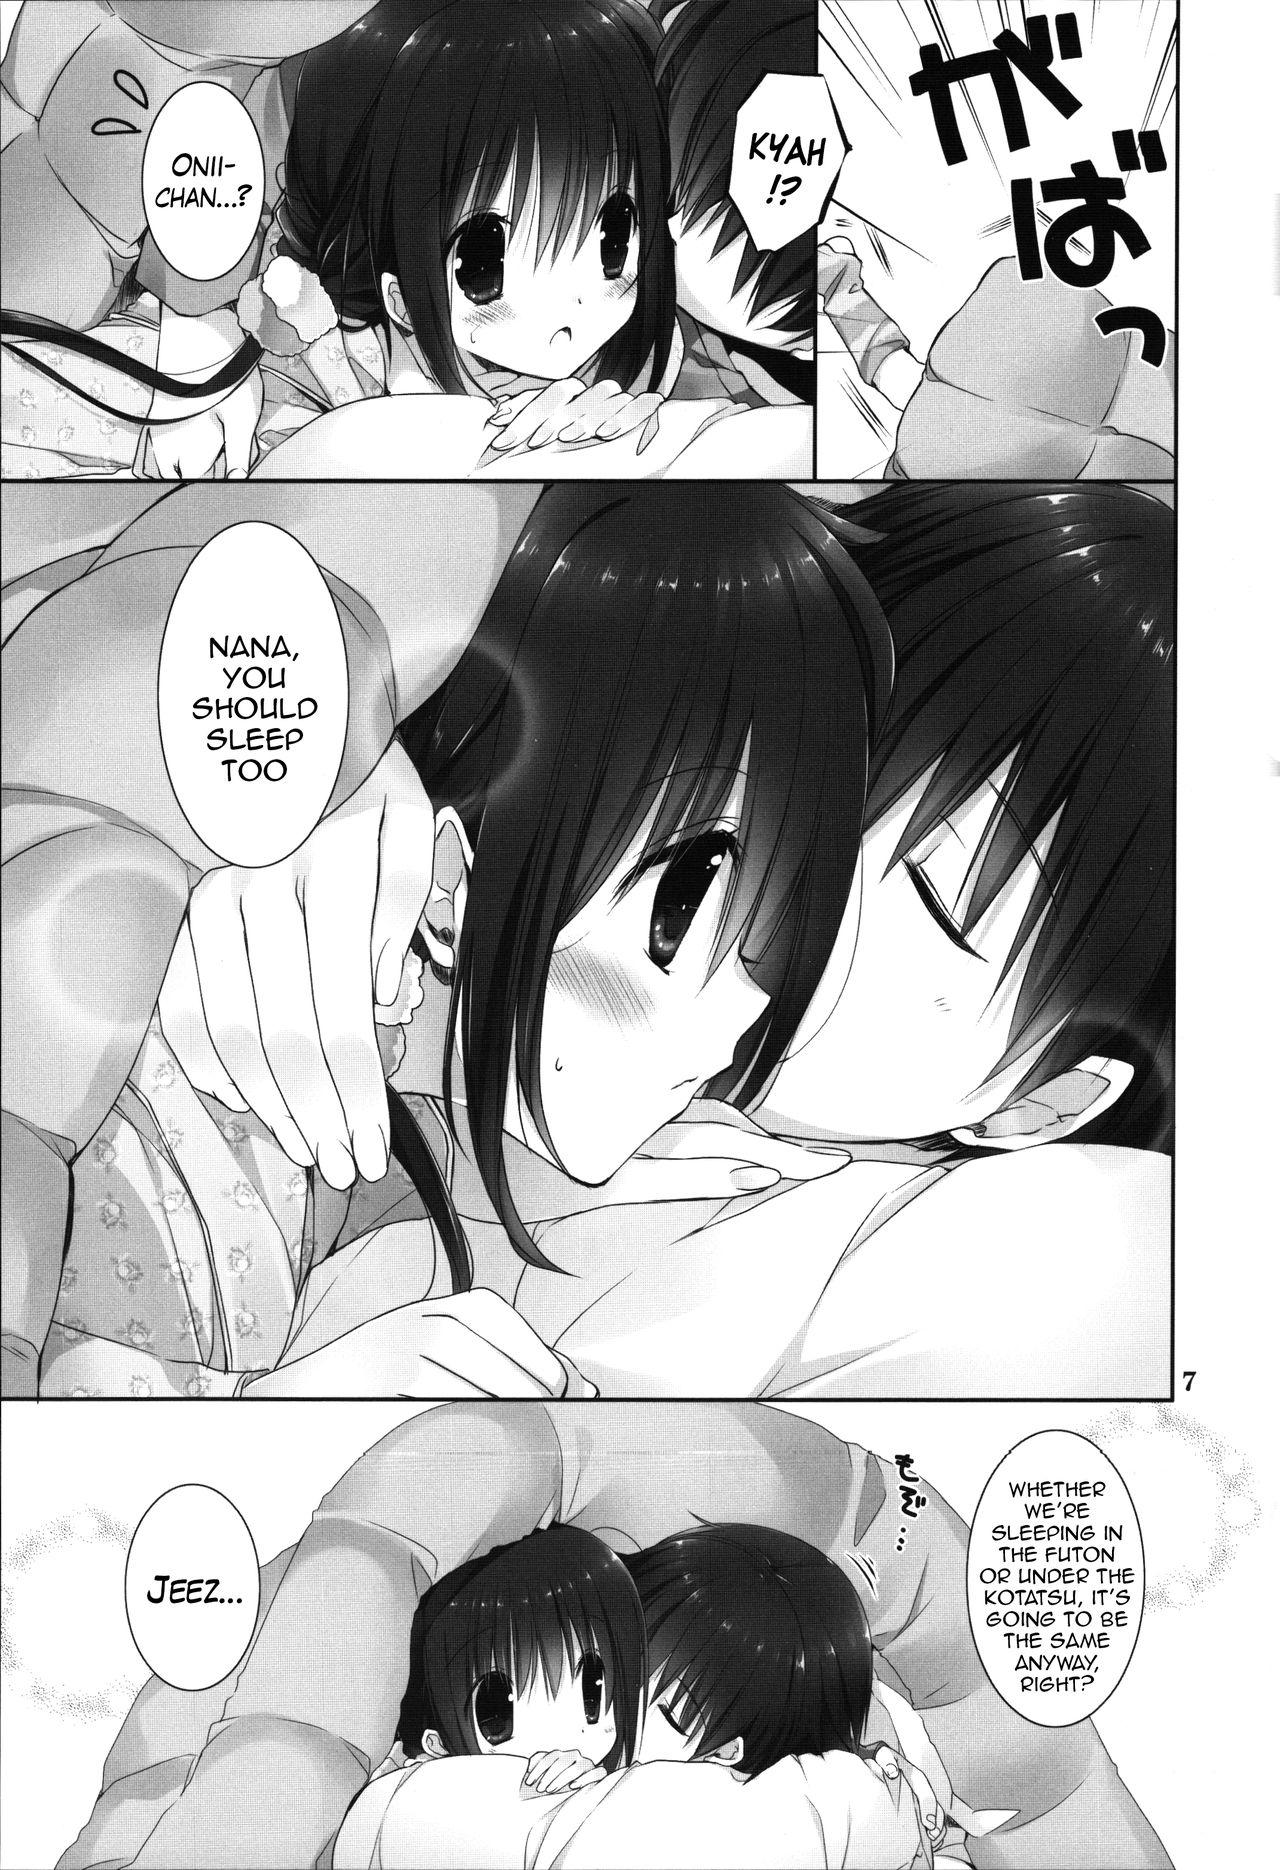 Passionate Imouto no Otetsudai 8 | Little Sister Helper 8 Mommy - Page 6